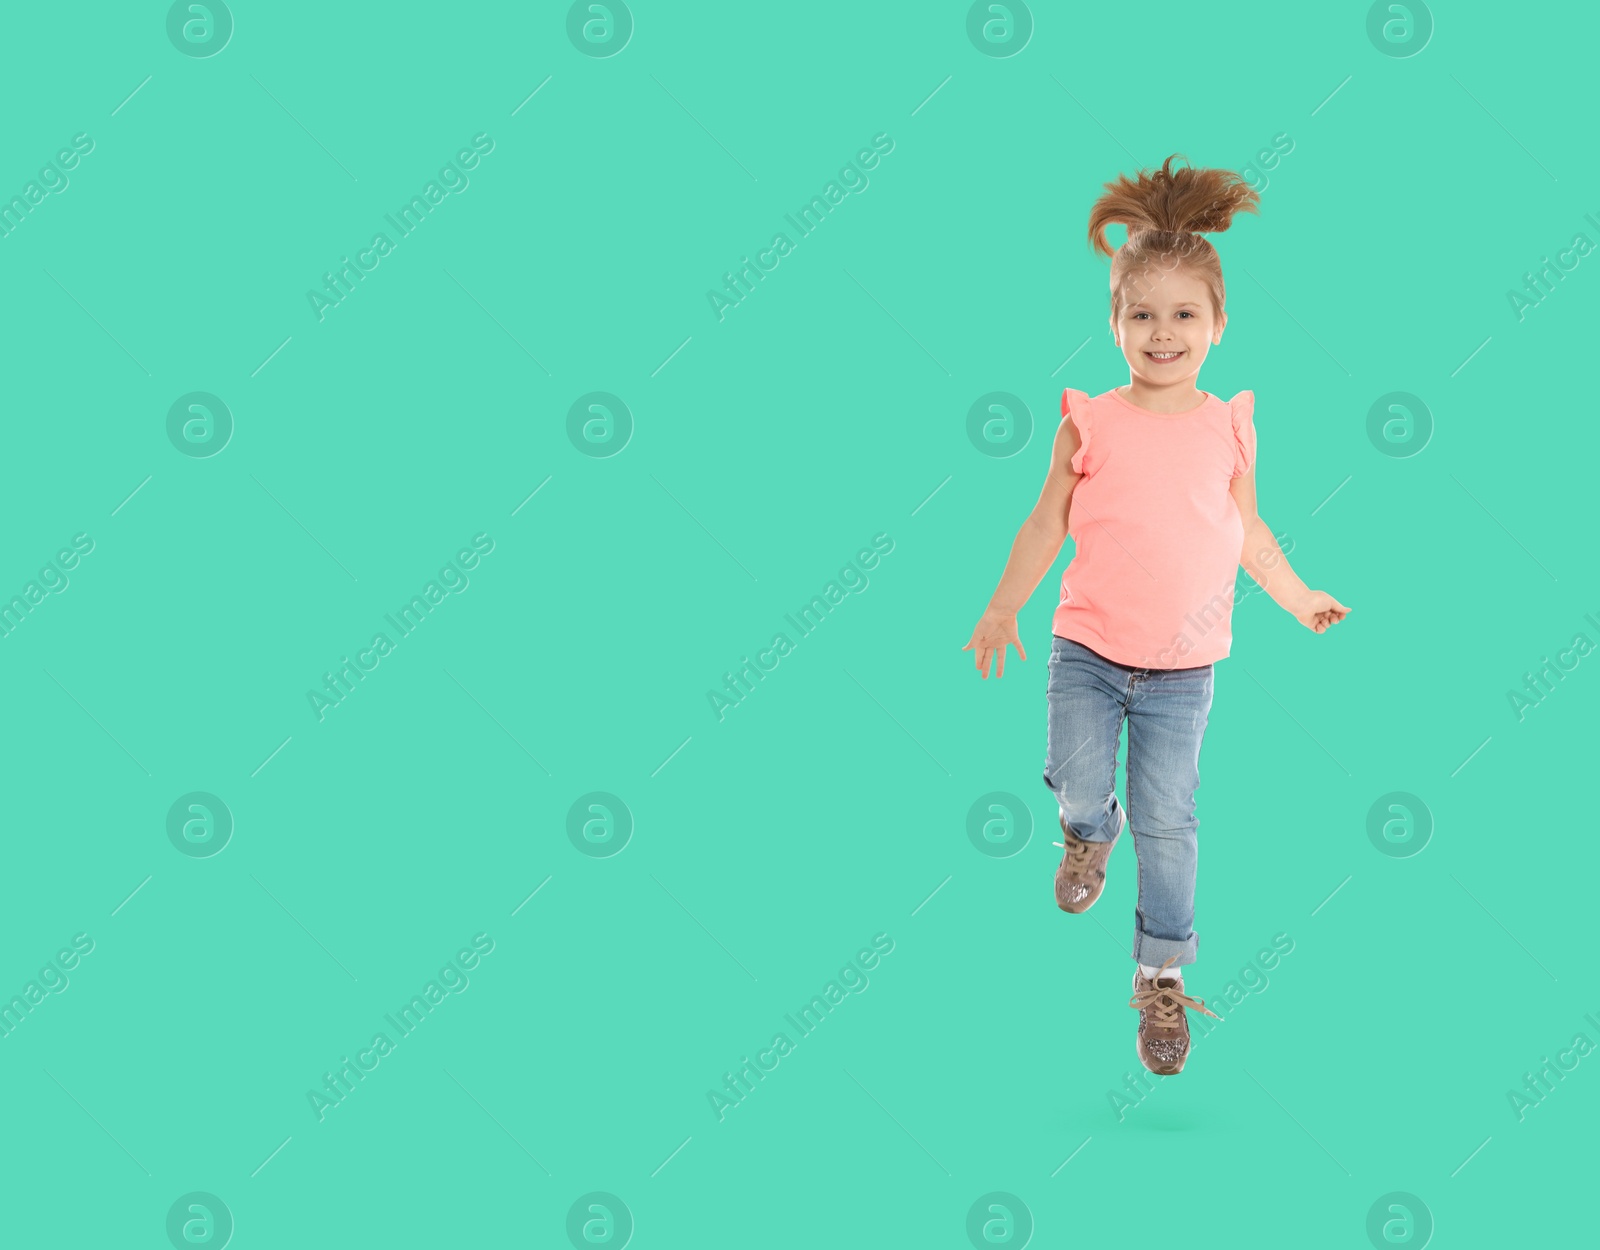 Image of Cute girl jumping on turquoise background, space for text